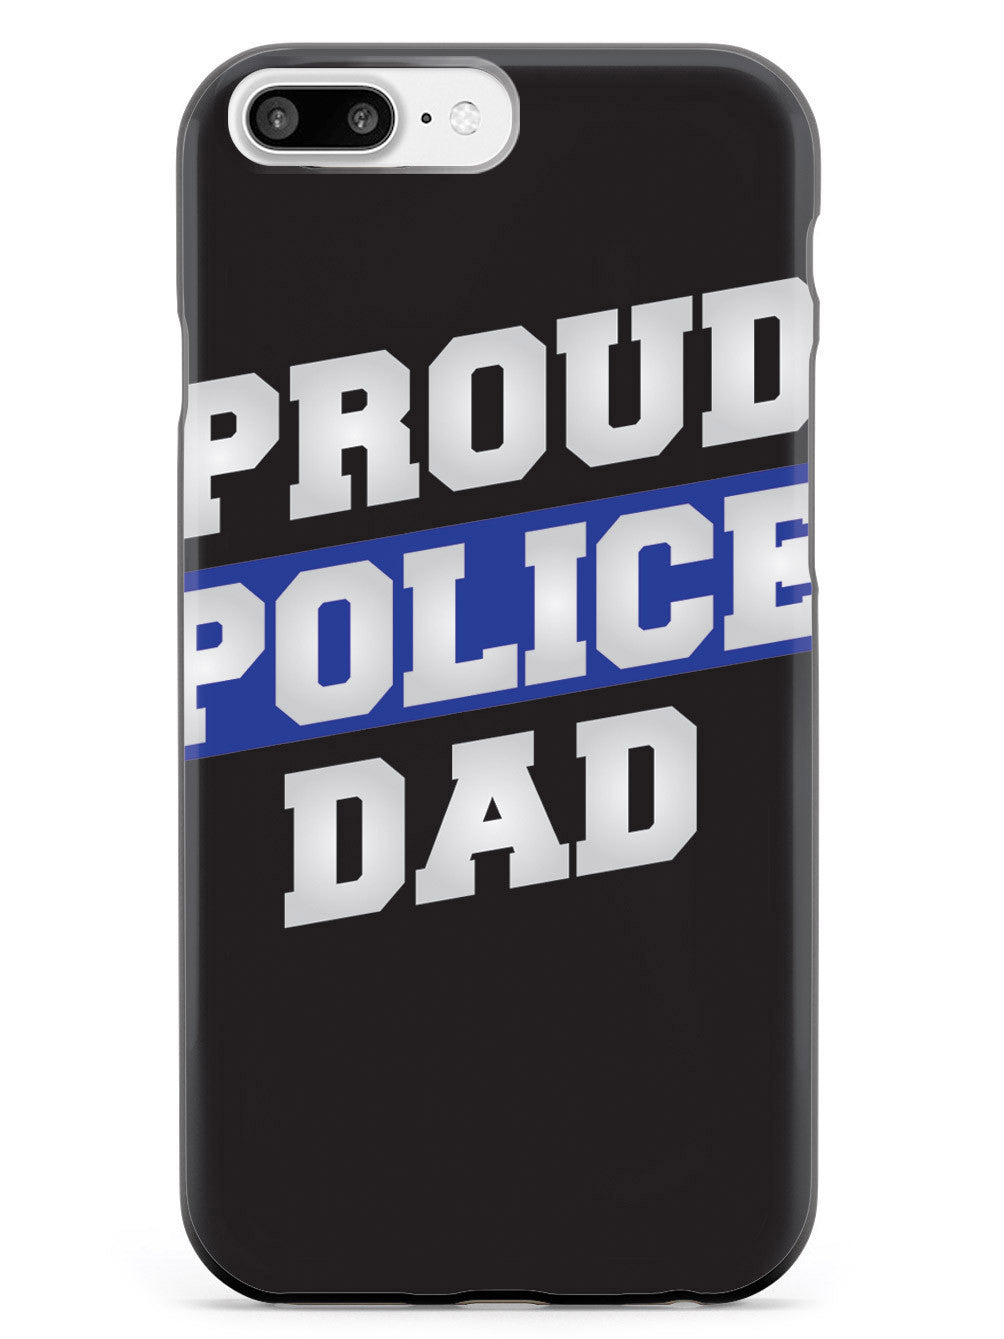 Proud Police Dad - Thin Blue Line Case